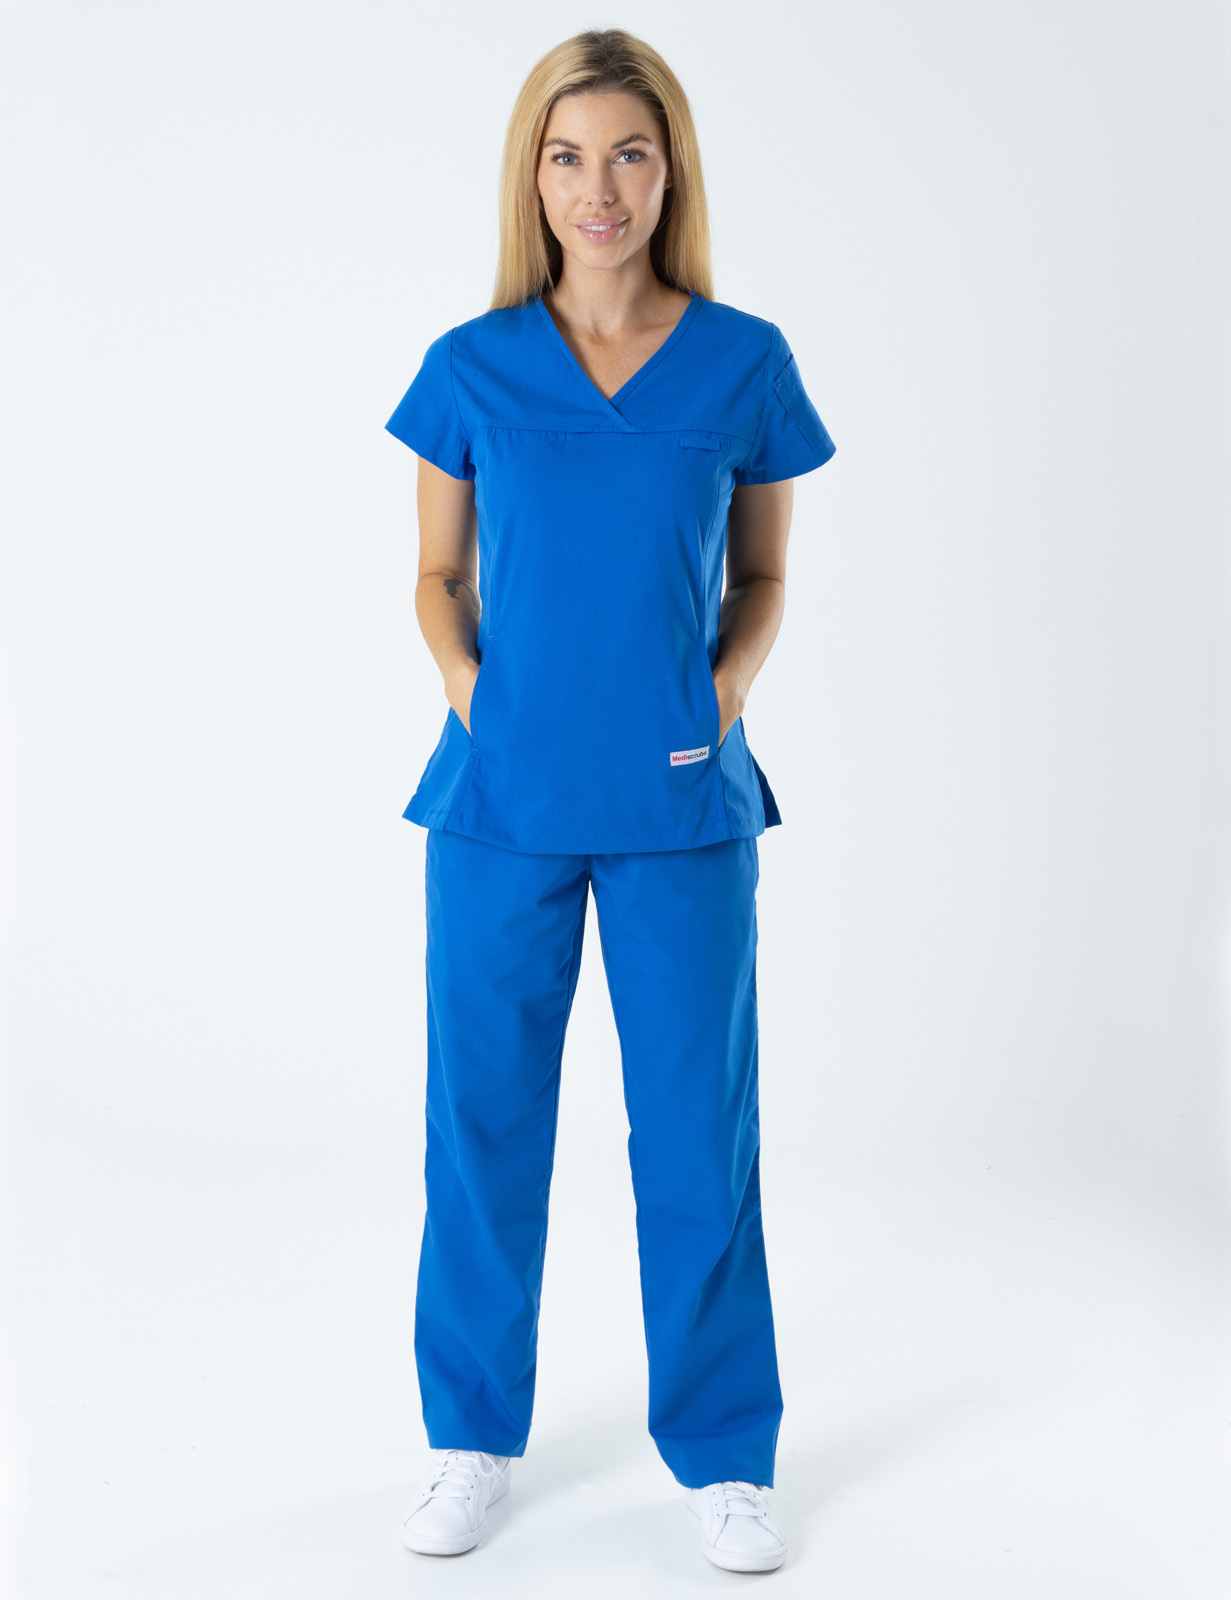 Capricorn Coast Hospital - RN (Women's Fit Solid Scrub Top and Cargo Pants in Royal incl Logos)